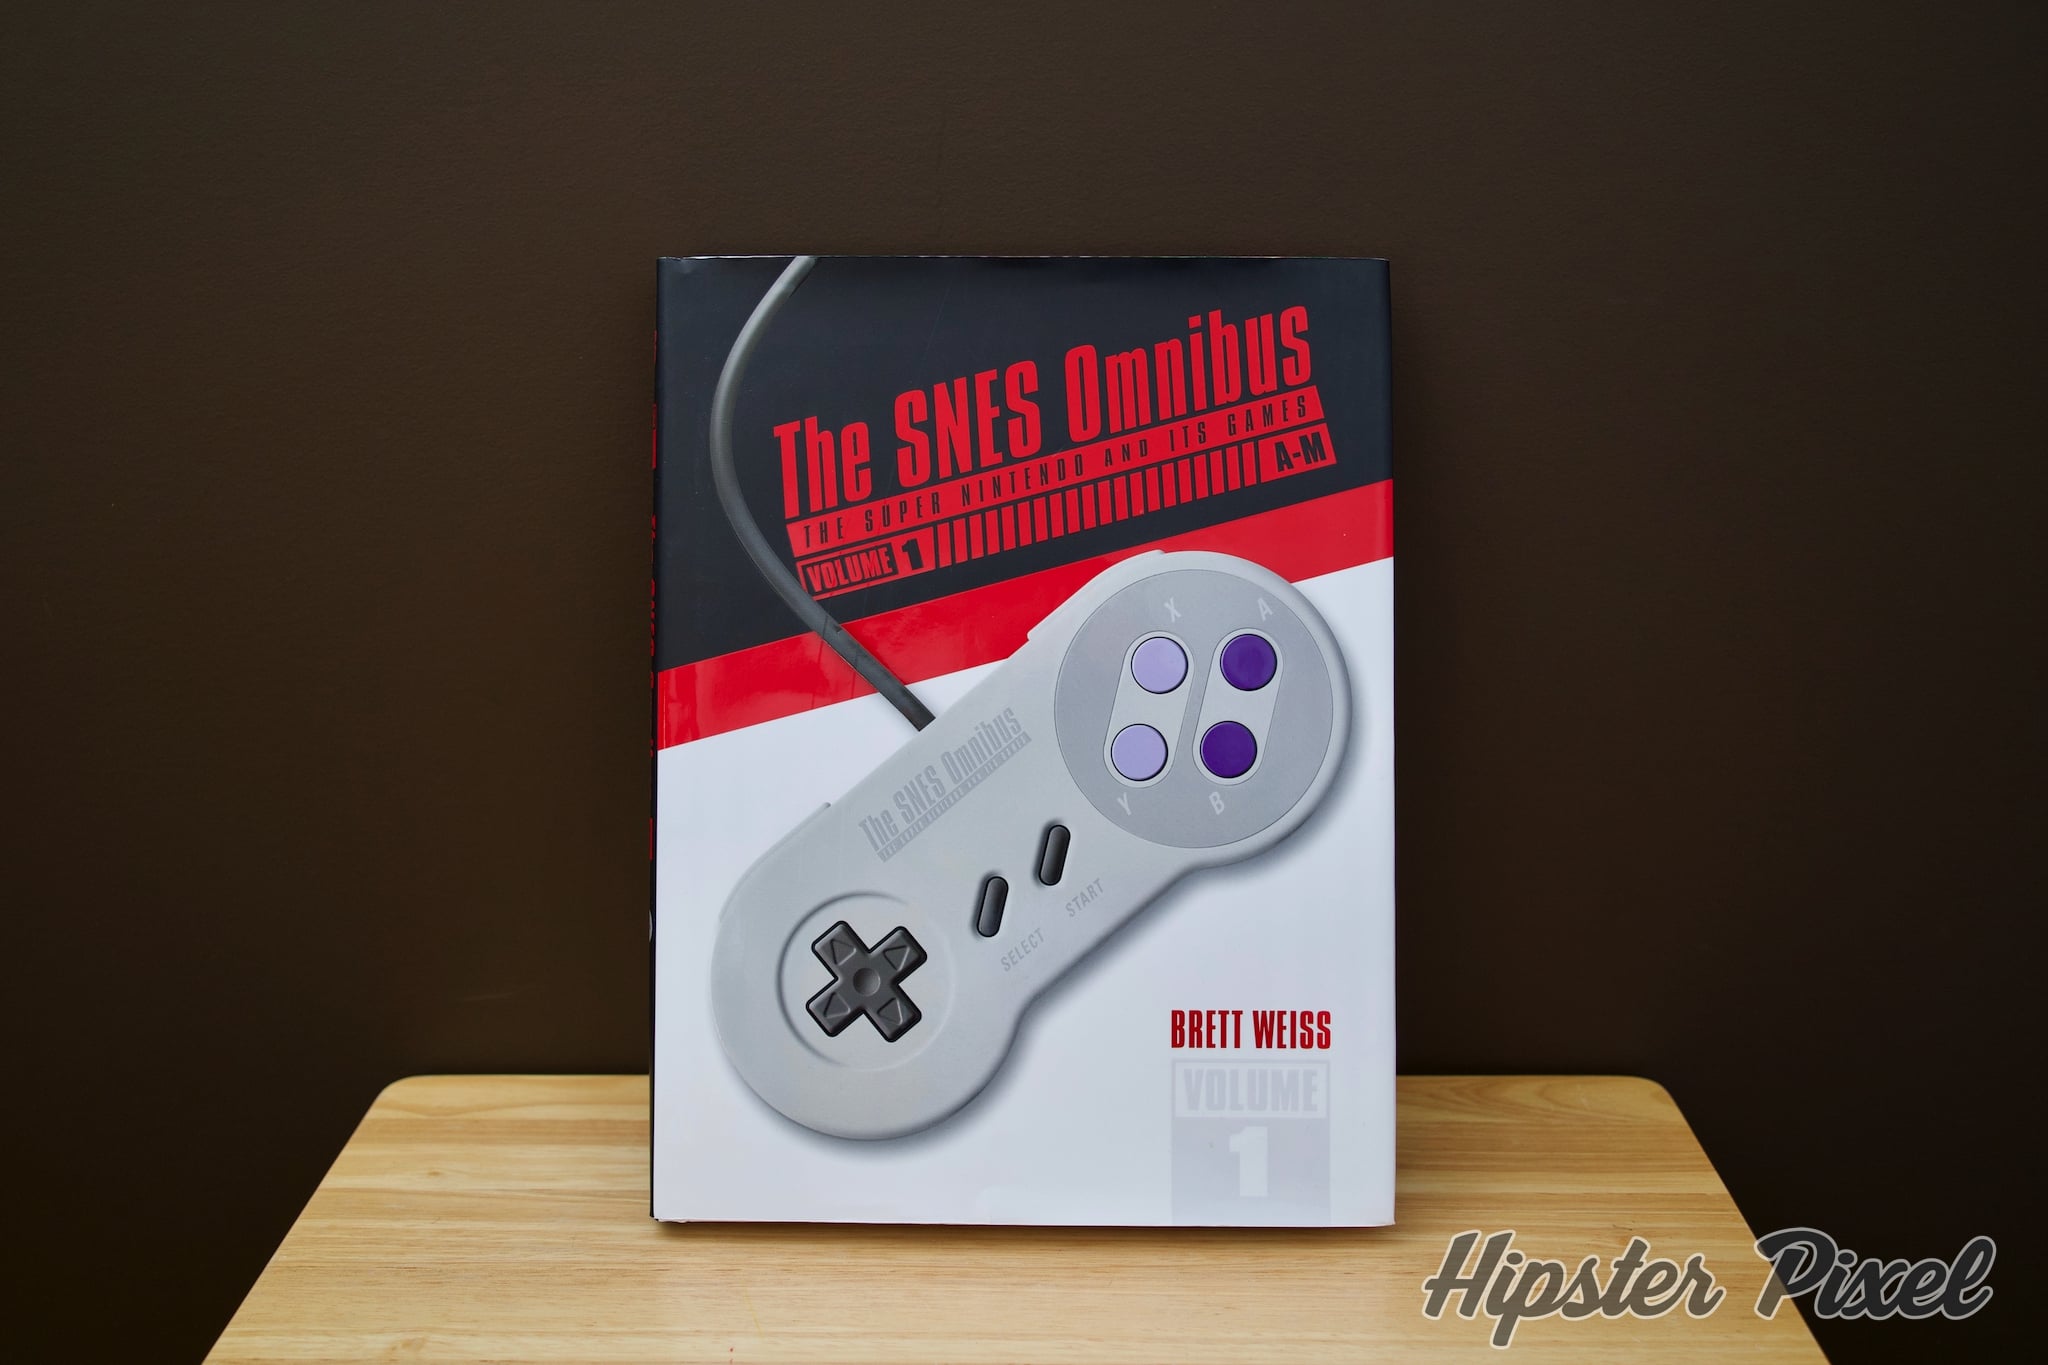 The SNES Omnibus by Brett Weiss, an Amazing Retro Anthology